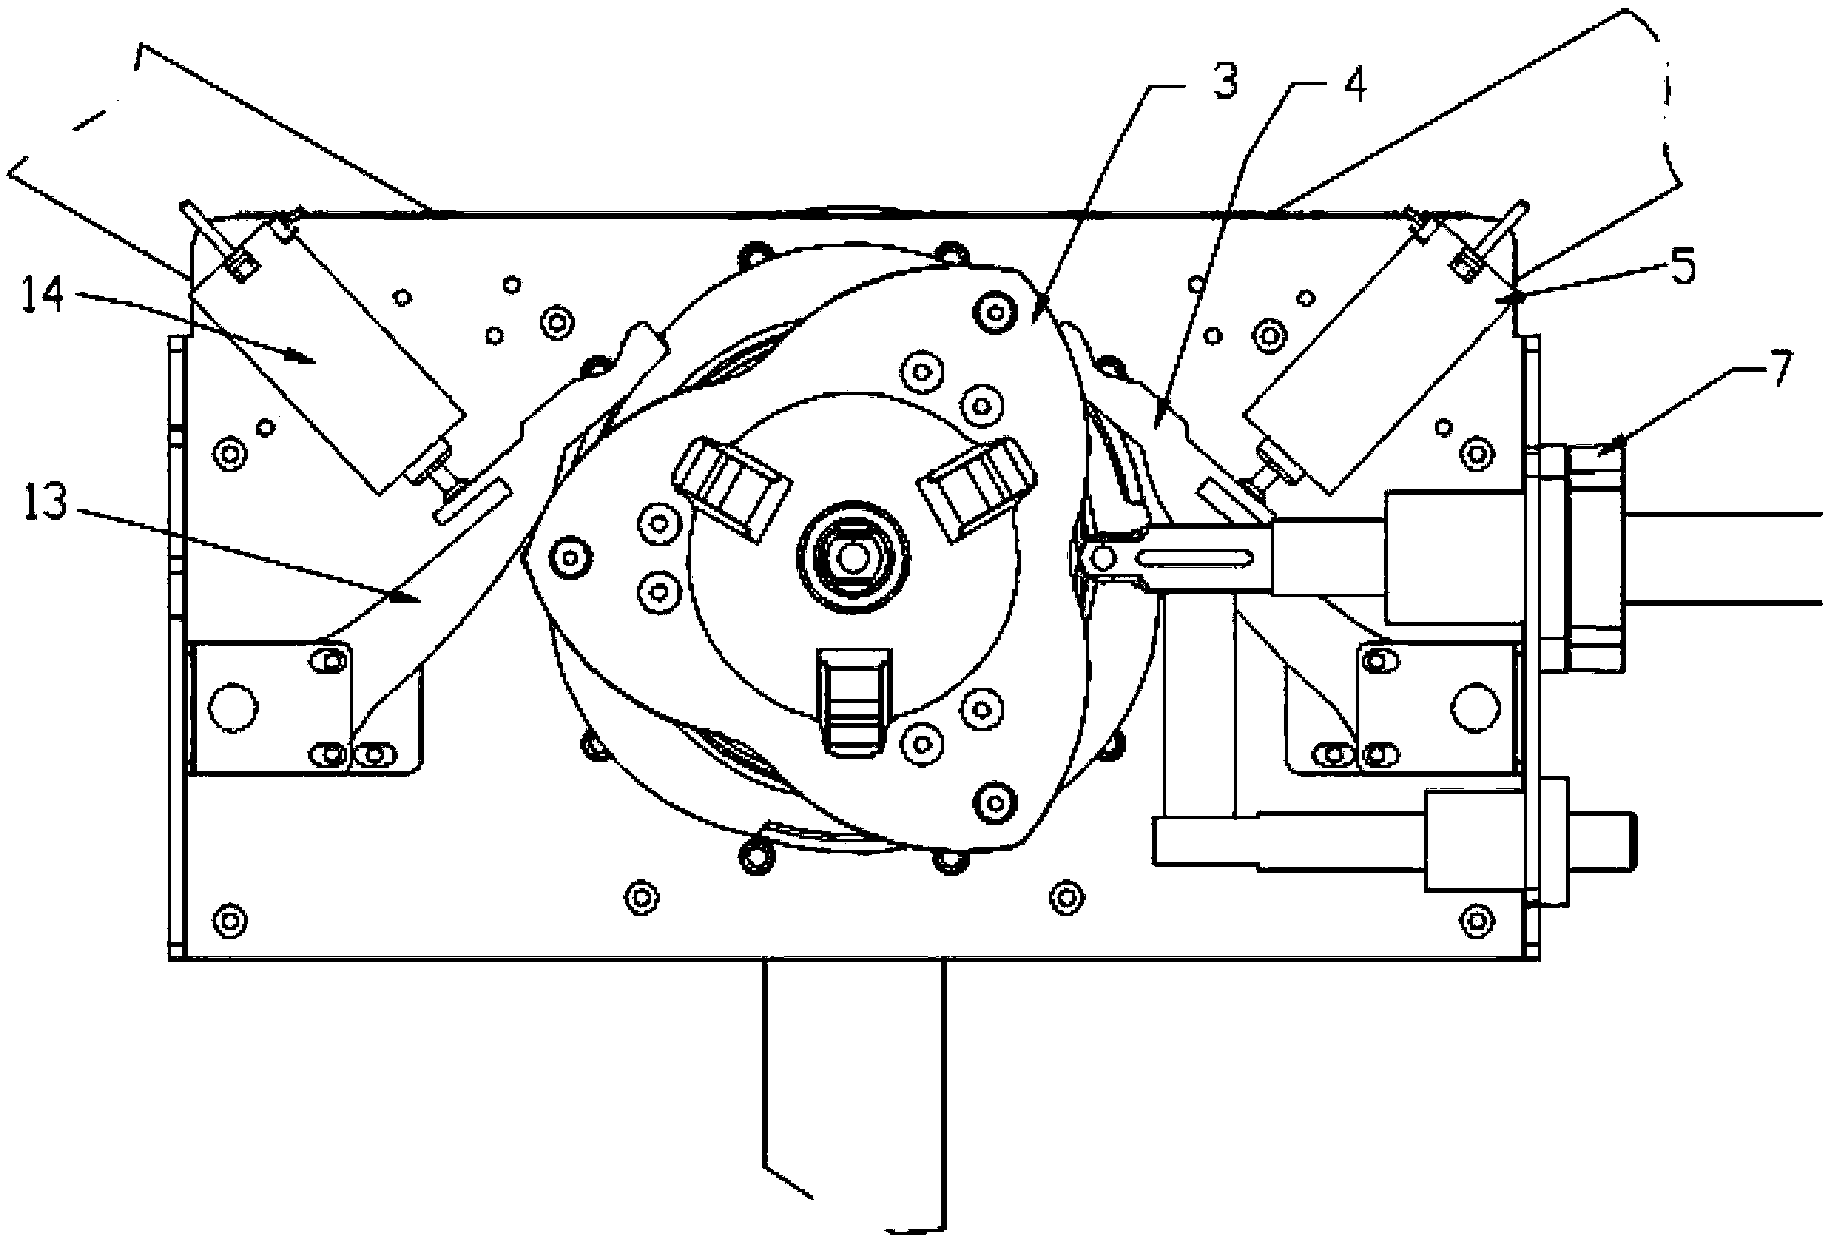 Three-roller gate movement and three-roller gate running method applying three-roller gate movement